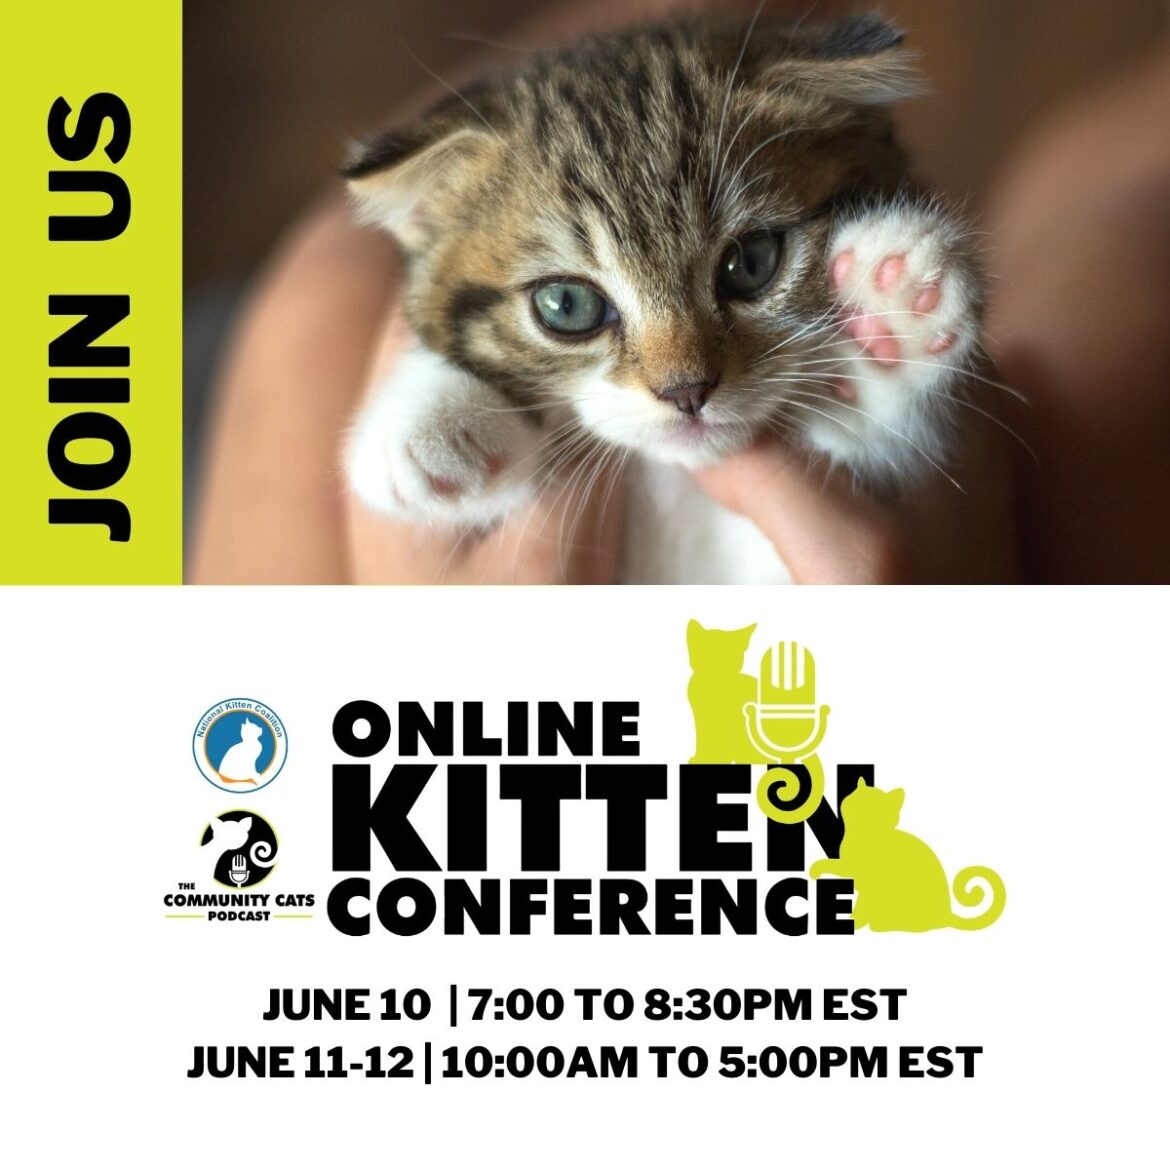 Online Conference Highlights Compassionate Care and Innovative Programs to Support Tiniest Felines